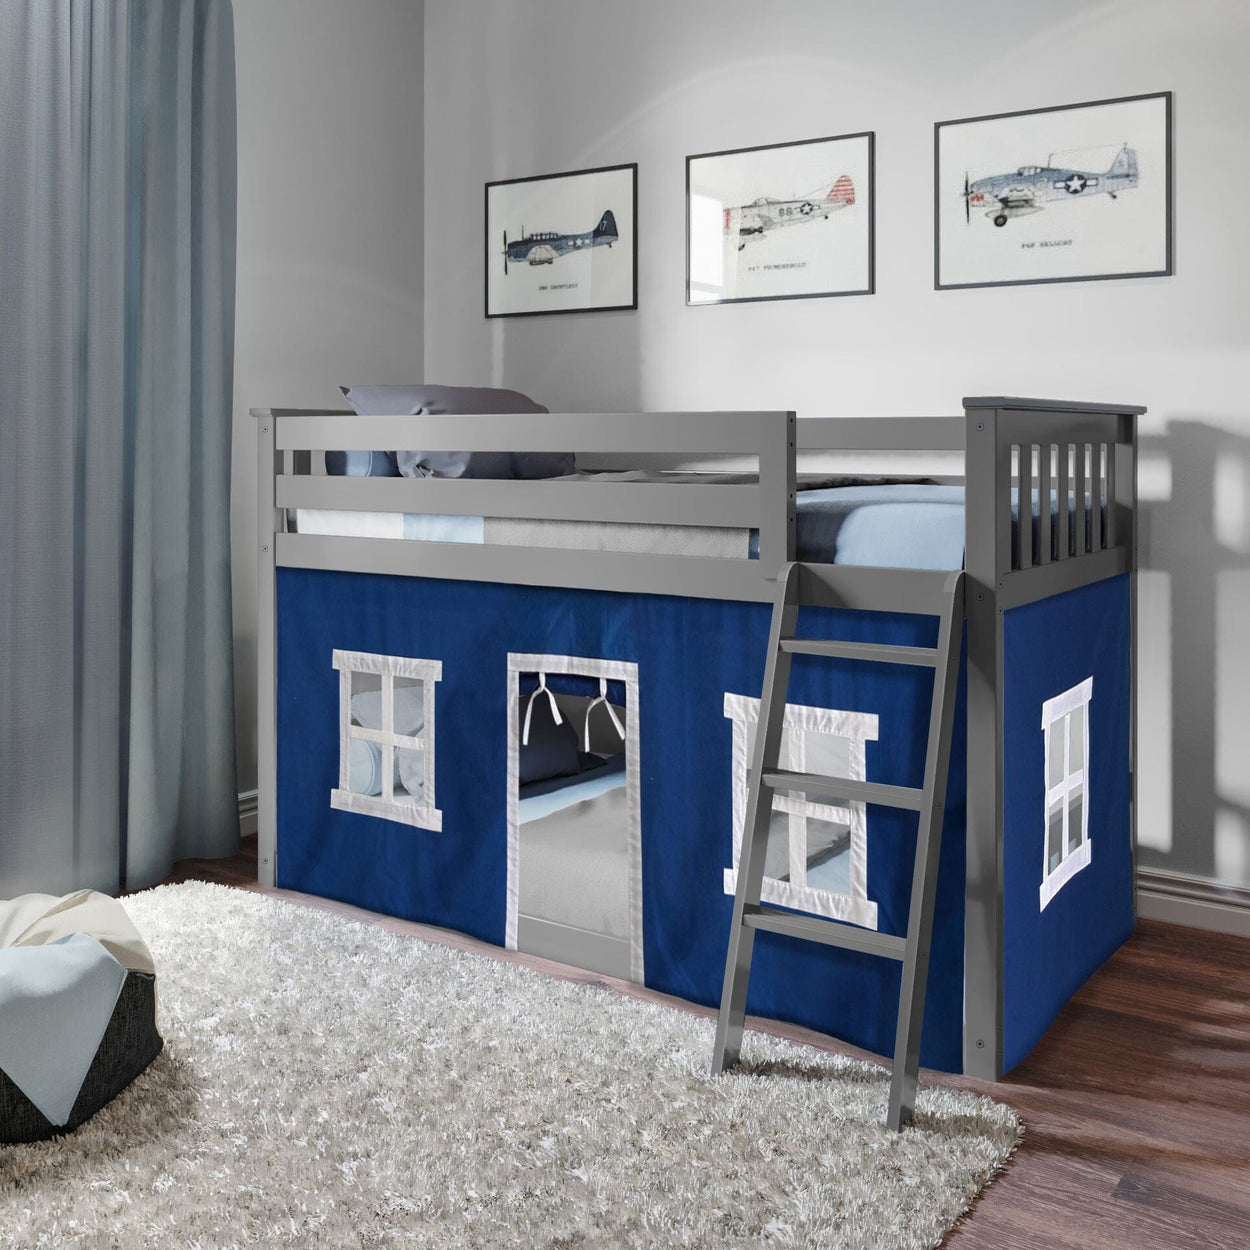 180214121022 : Bunk Beds Twin-Size Low Bunk Bed With Curtain, Grey + Blue